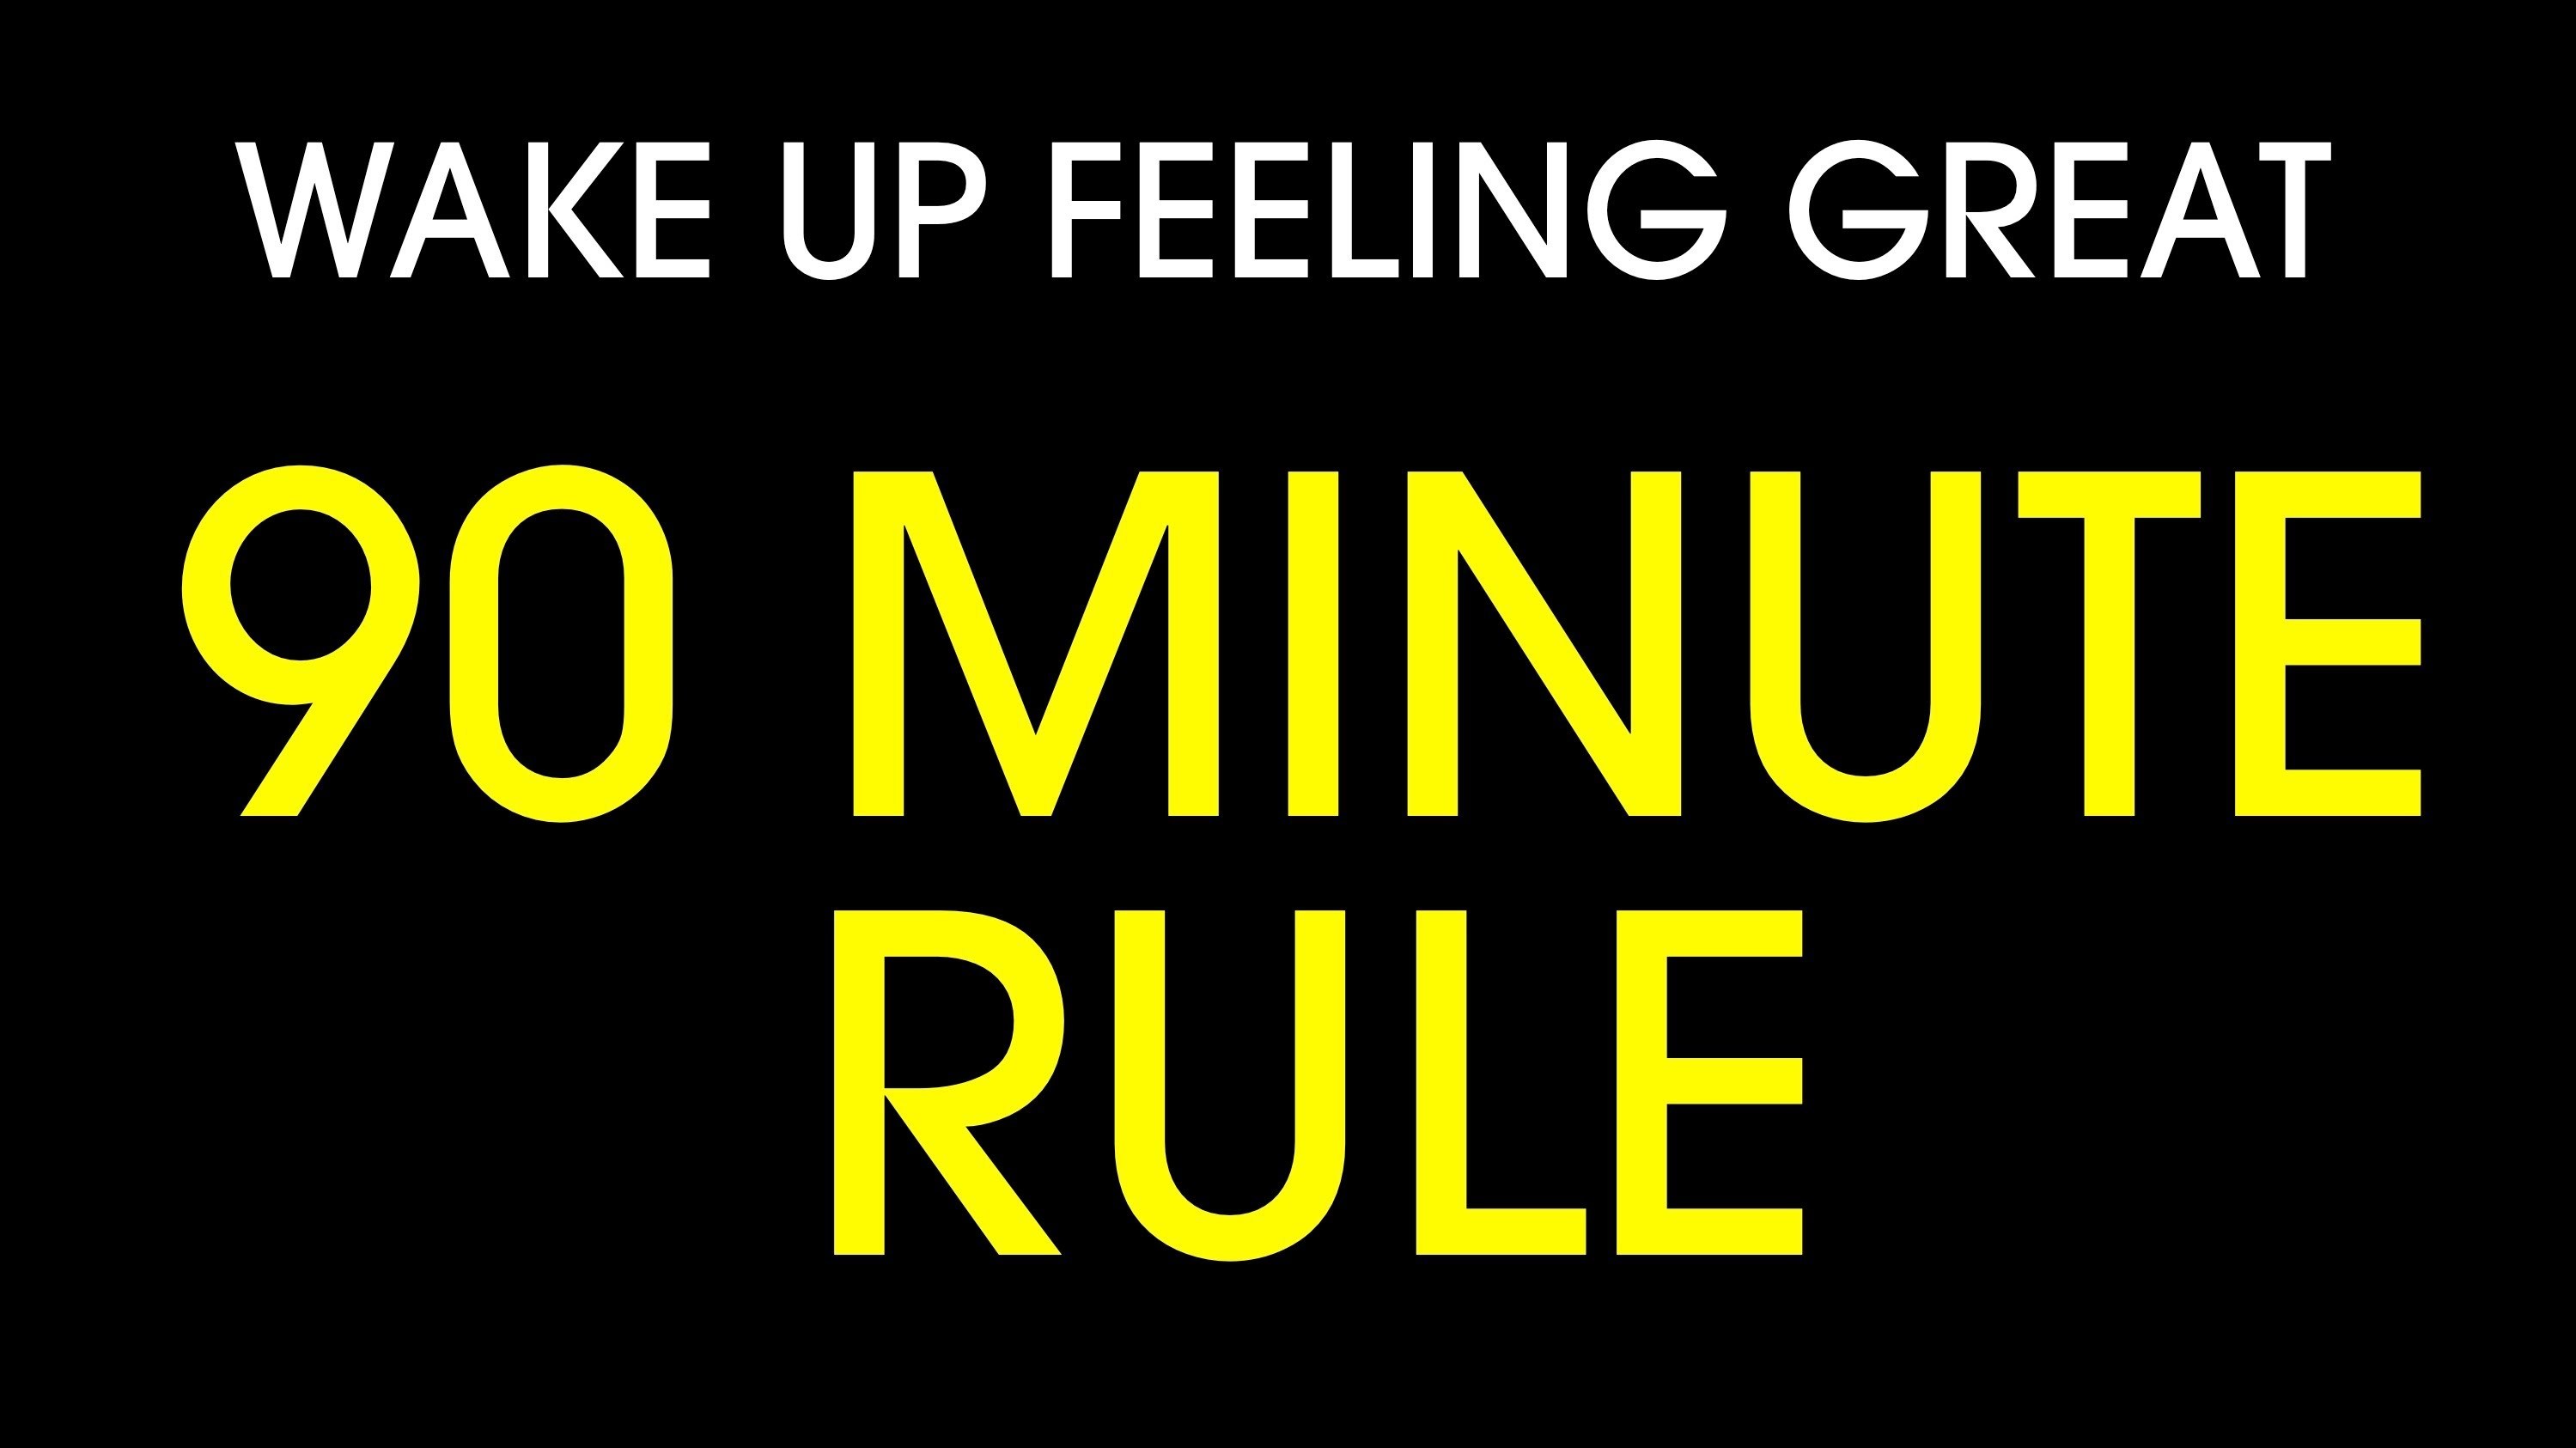 The 90 Minute Rule: How to Wake Up Feeling Great